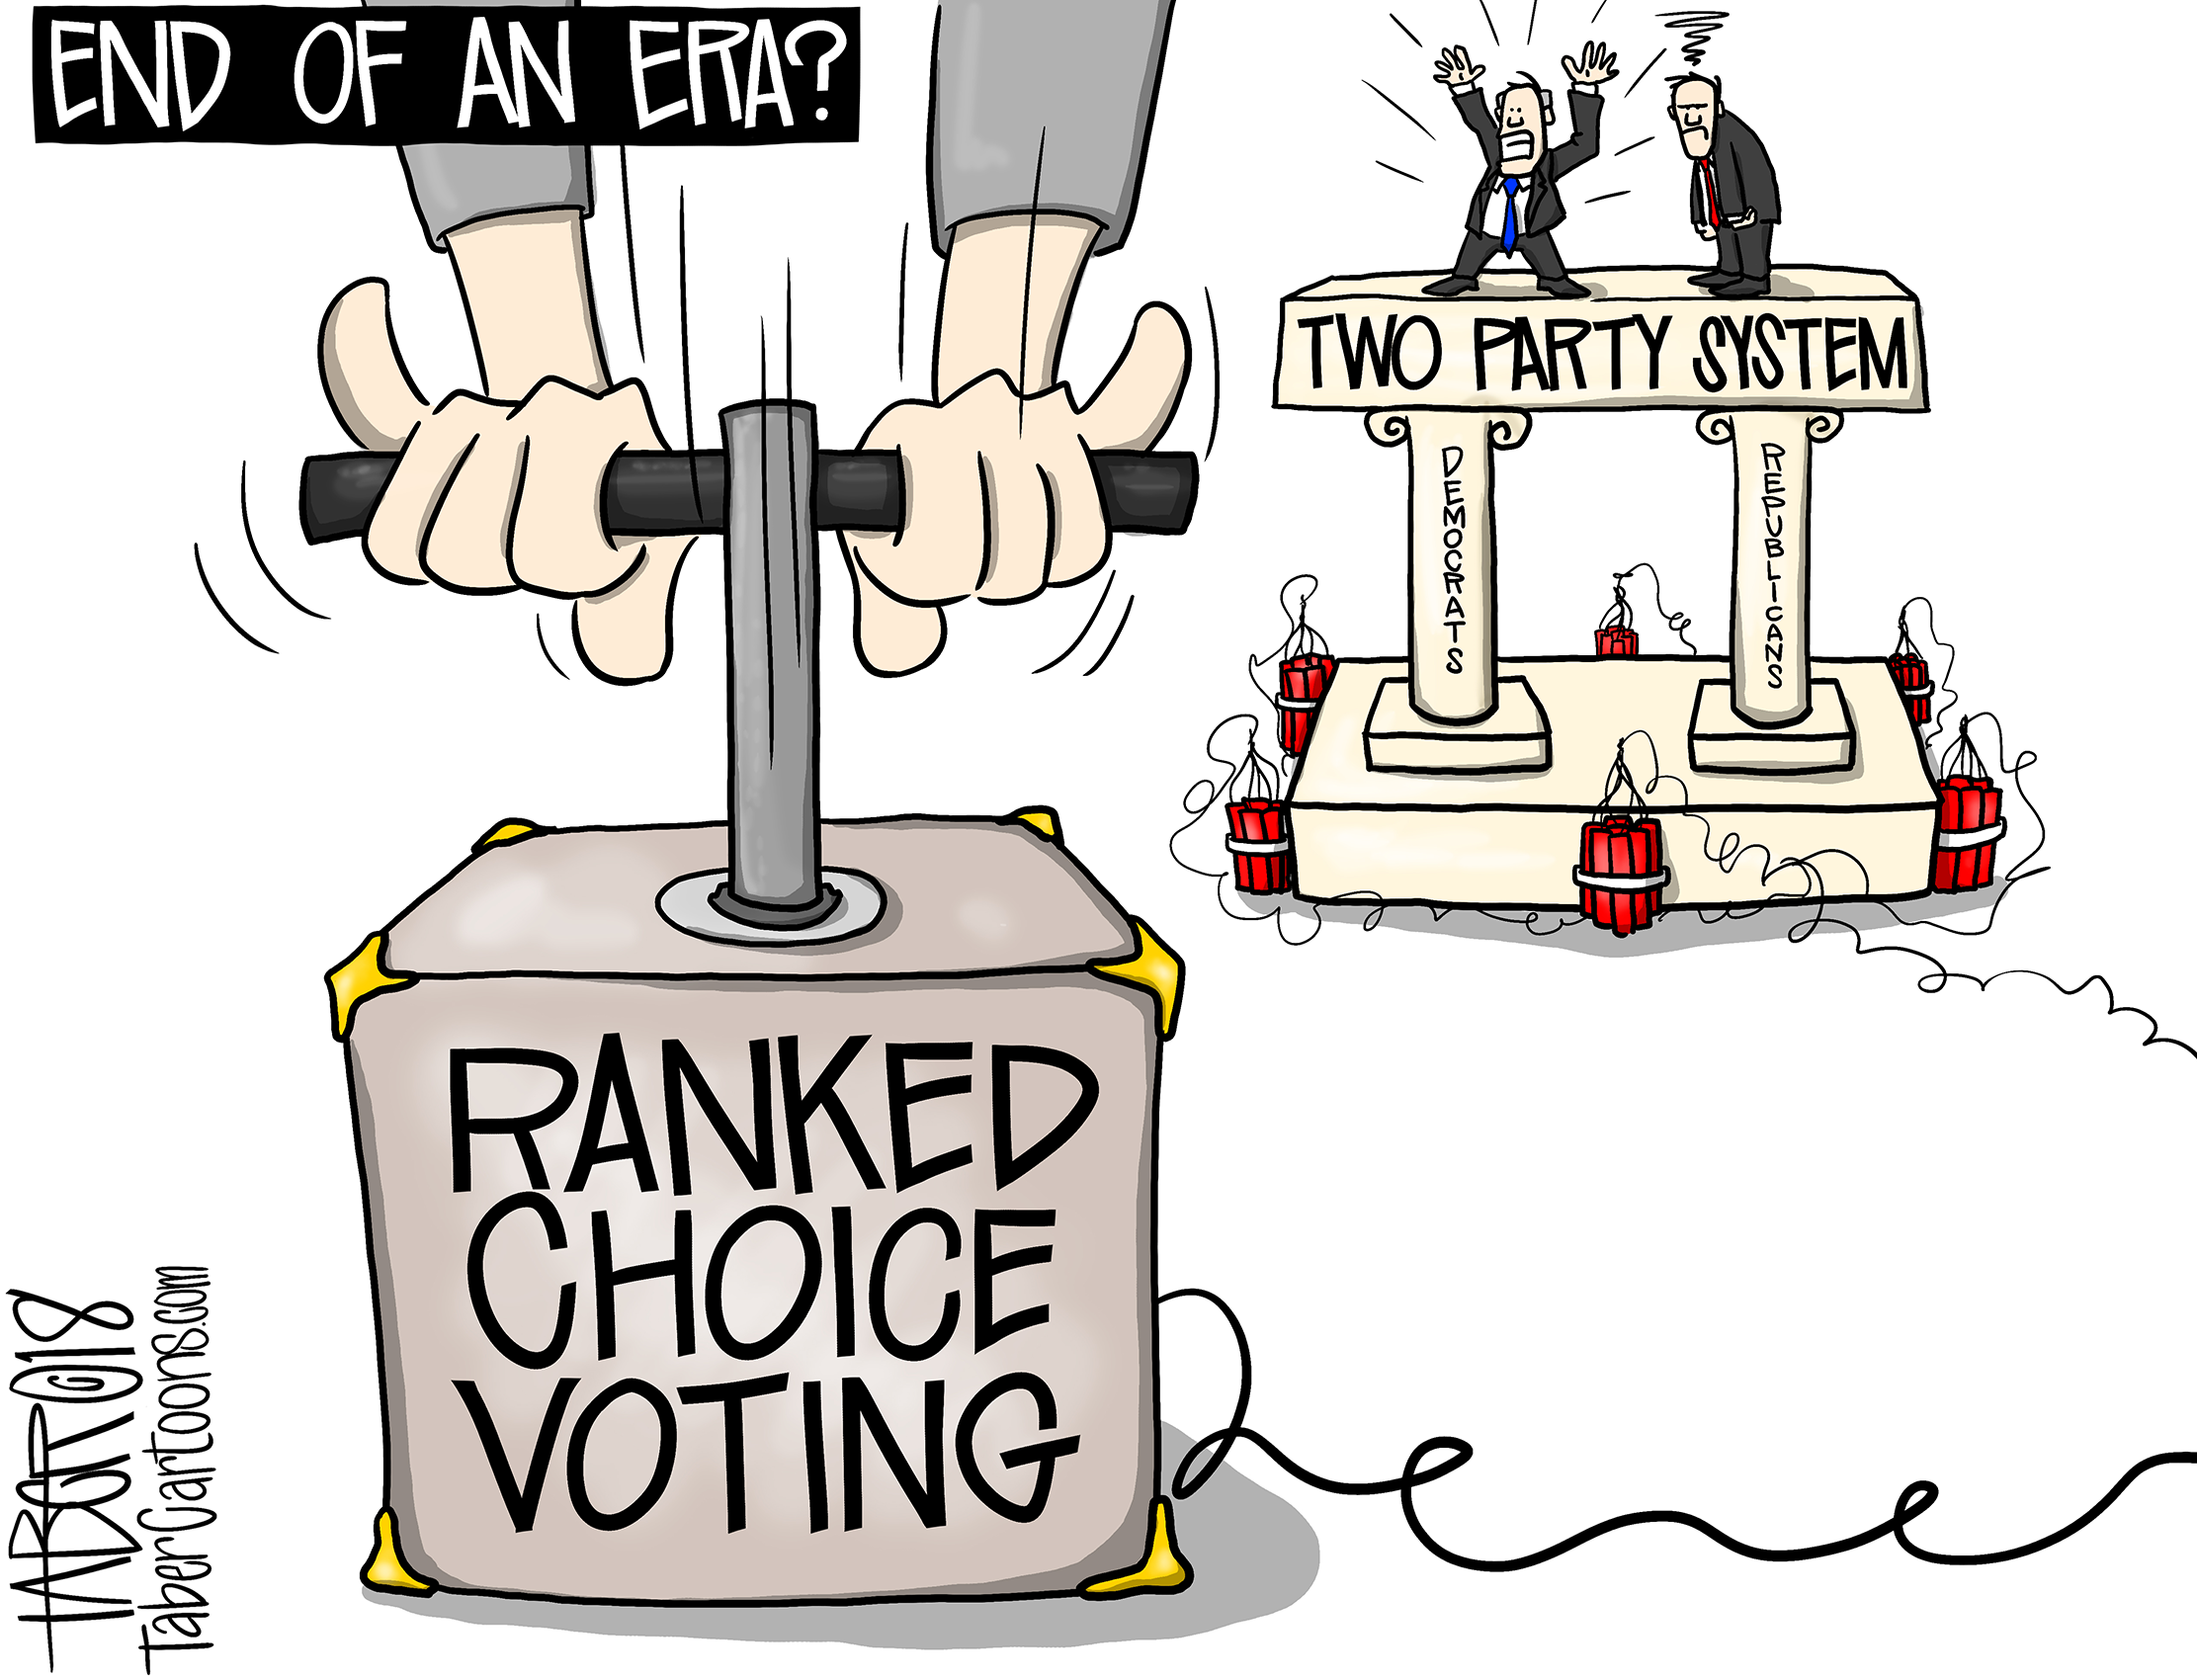 RCV vs Two Party System